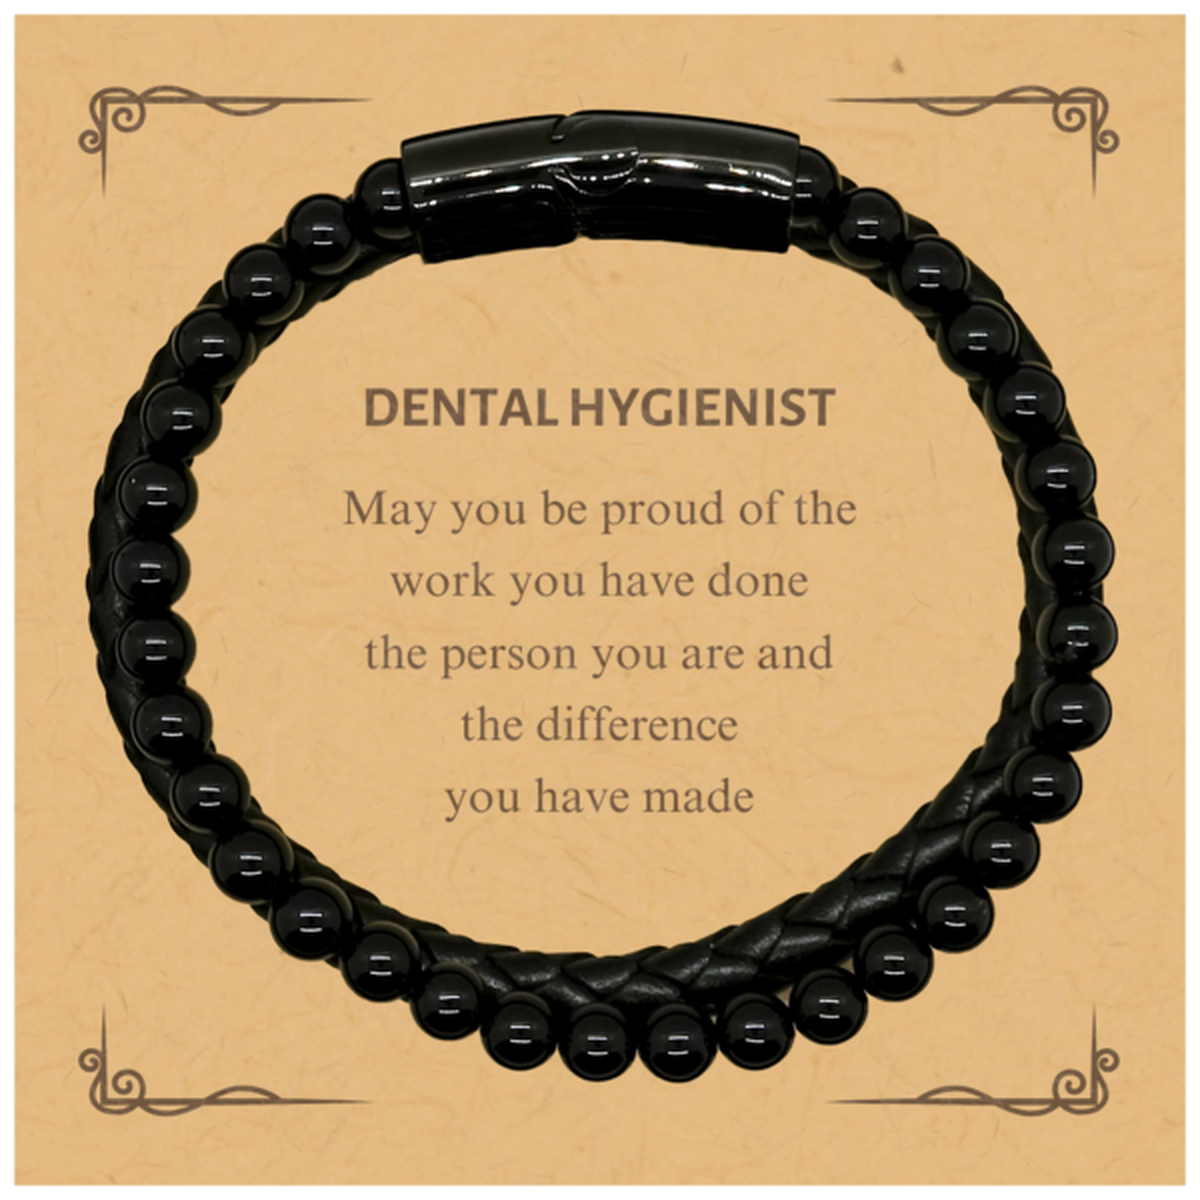 Dental Hygienist May you be proud of the work you have done, Retirement Dental Hygienist Stone Leather Bracelets for Colleague Appreciation Gifts Amazing for Dental Hygienist